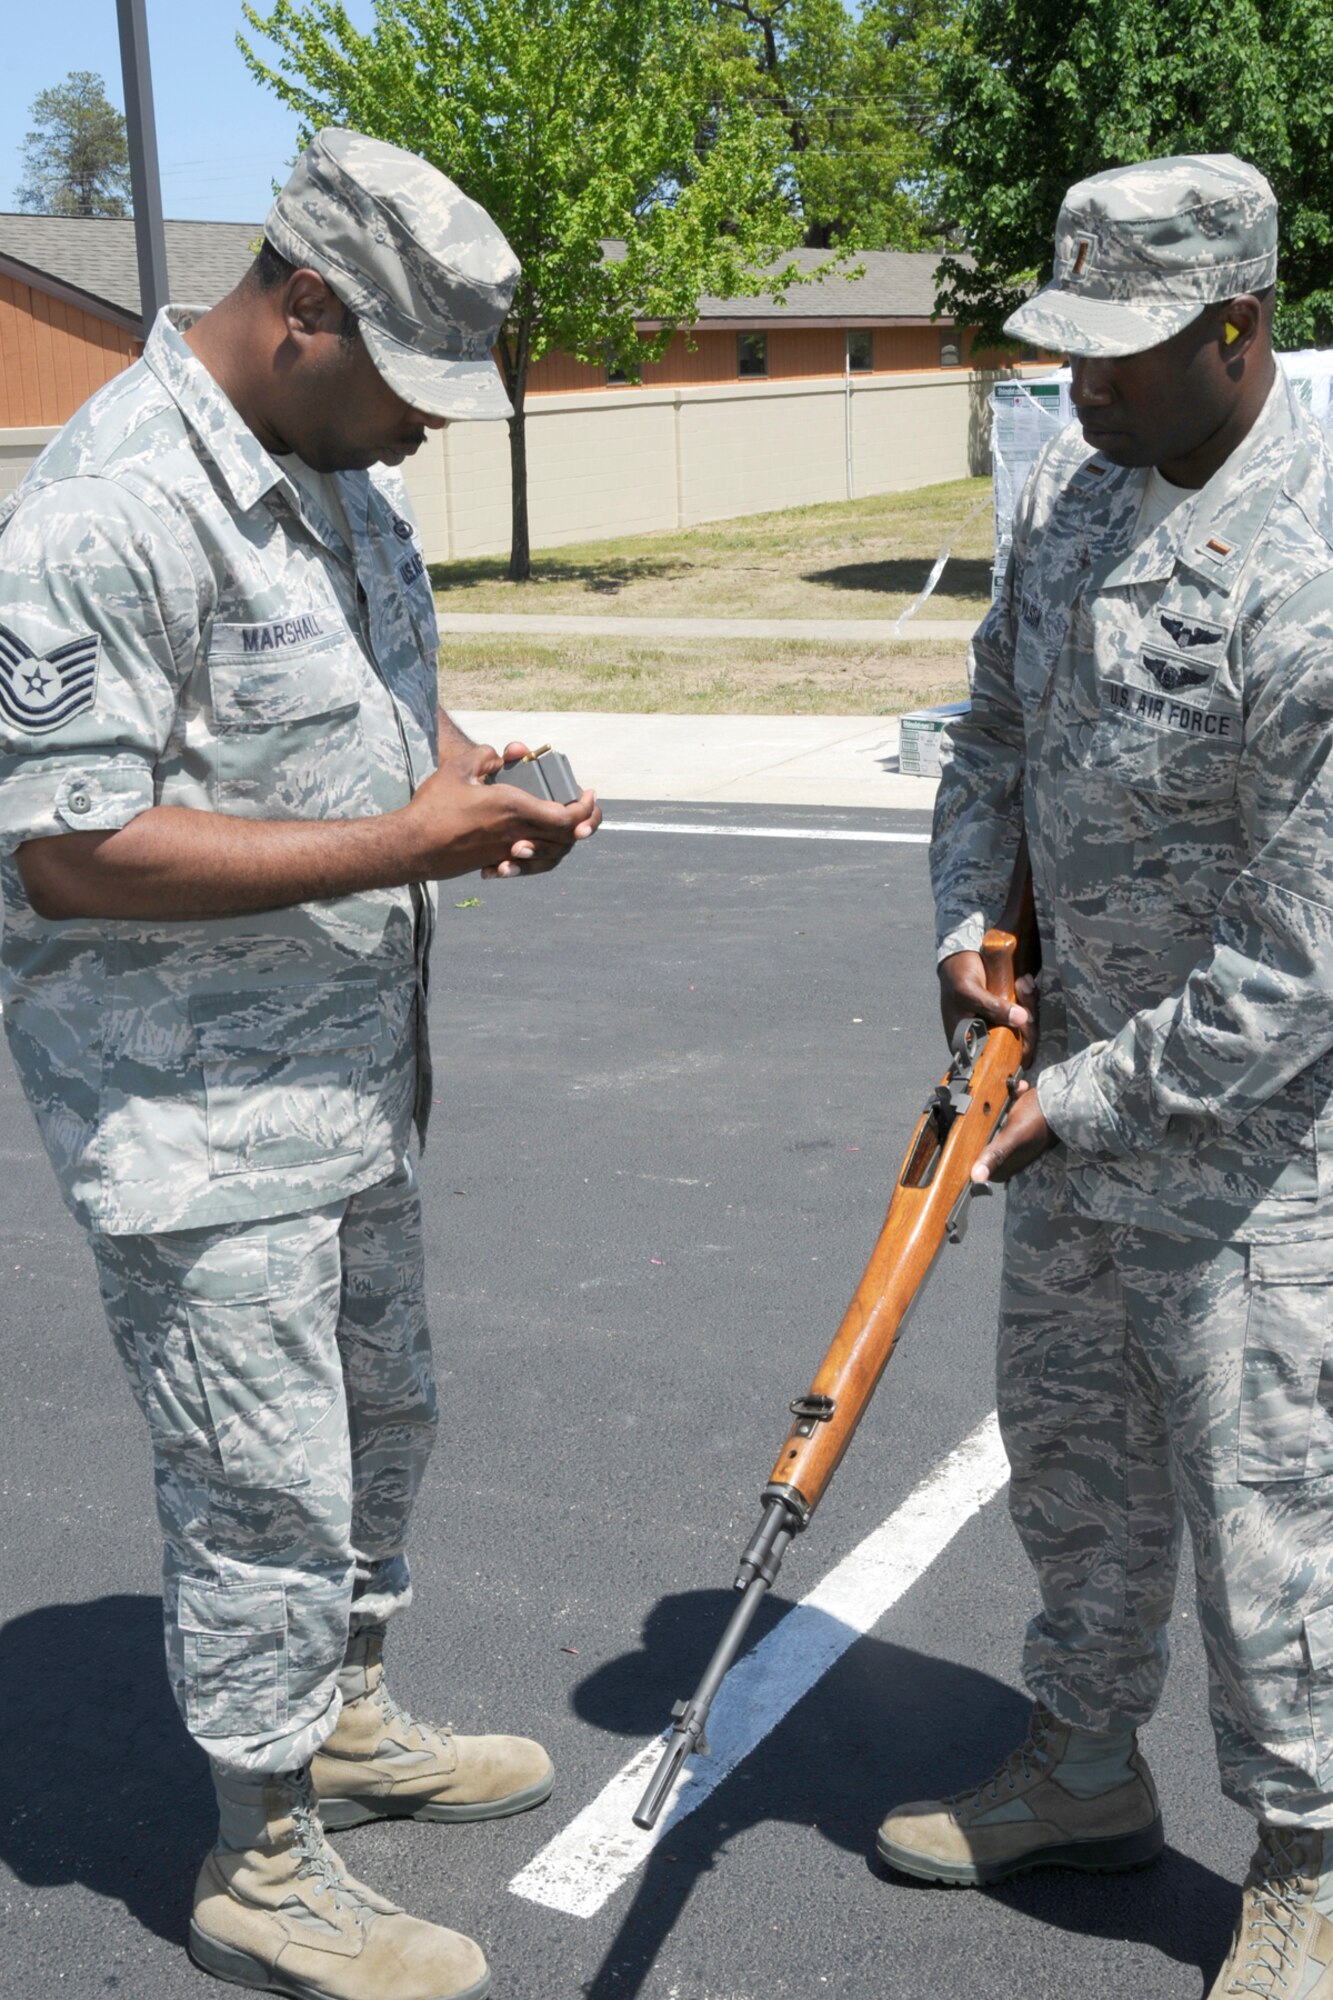 TSgt. Ronald Marhall, a member of the Wright Patterson Air Force Base Honor Guard, provides instruction in ceremonial rifle handling to 2nd Lt. Scott Wilson, a member of the 110th Airlift Wing, Michigan Air National Guard, during honor guard training at the Alpena Combat Readiness Training Center, Mich., May 23, 2012. Honor Guard Airmen say it is essential that honors are properly rendered to all fallen Airmen. (U.S. Air Force photo by TSgt. David Kujawa)